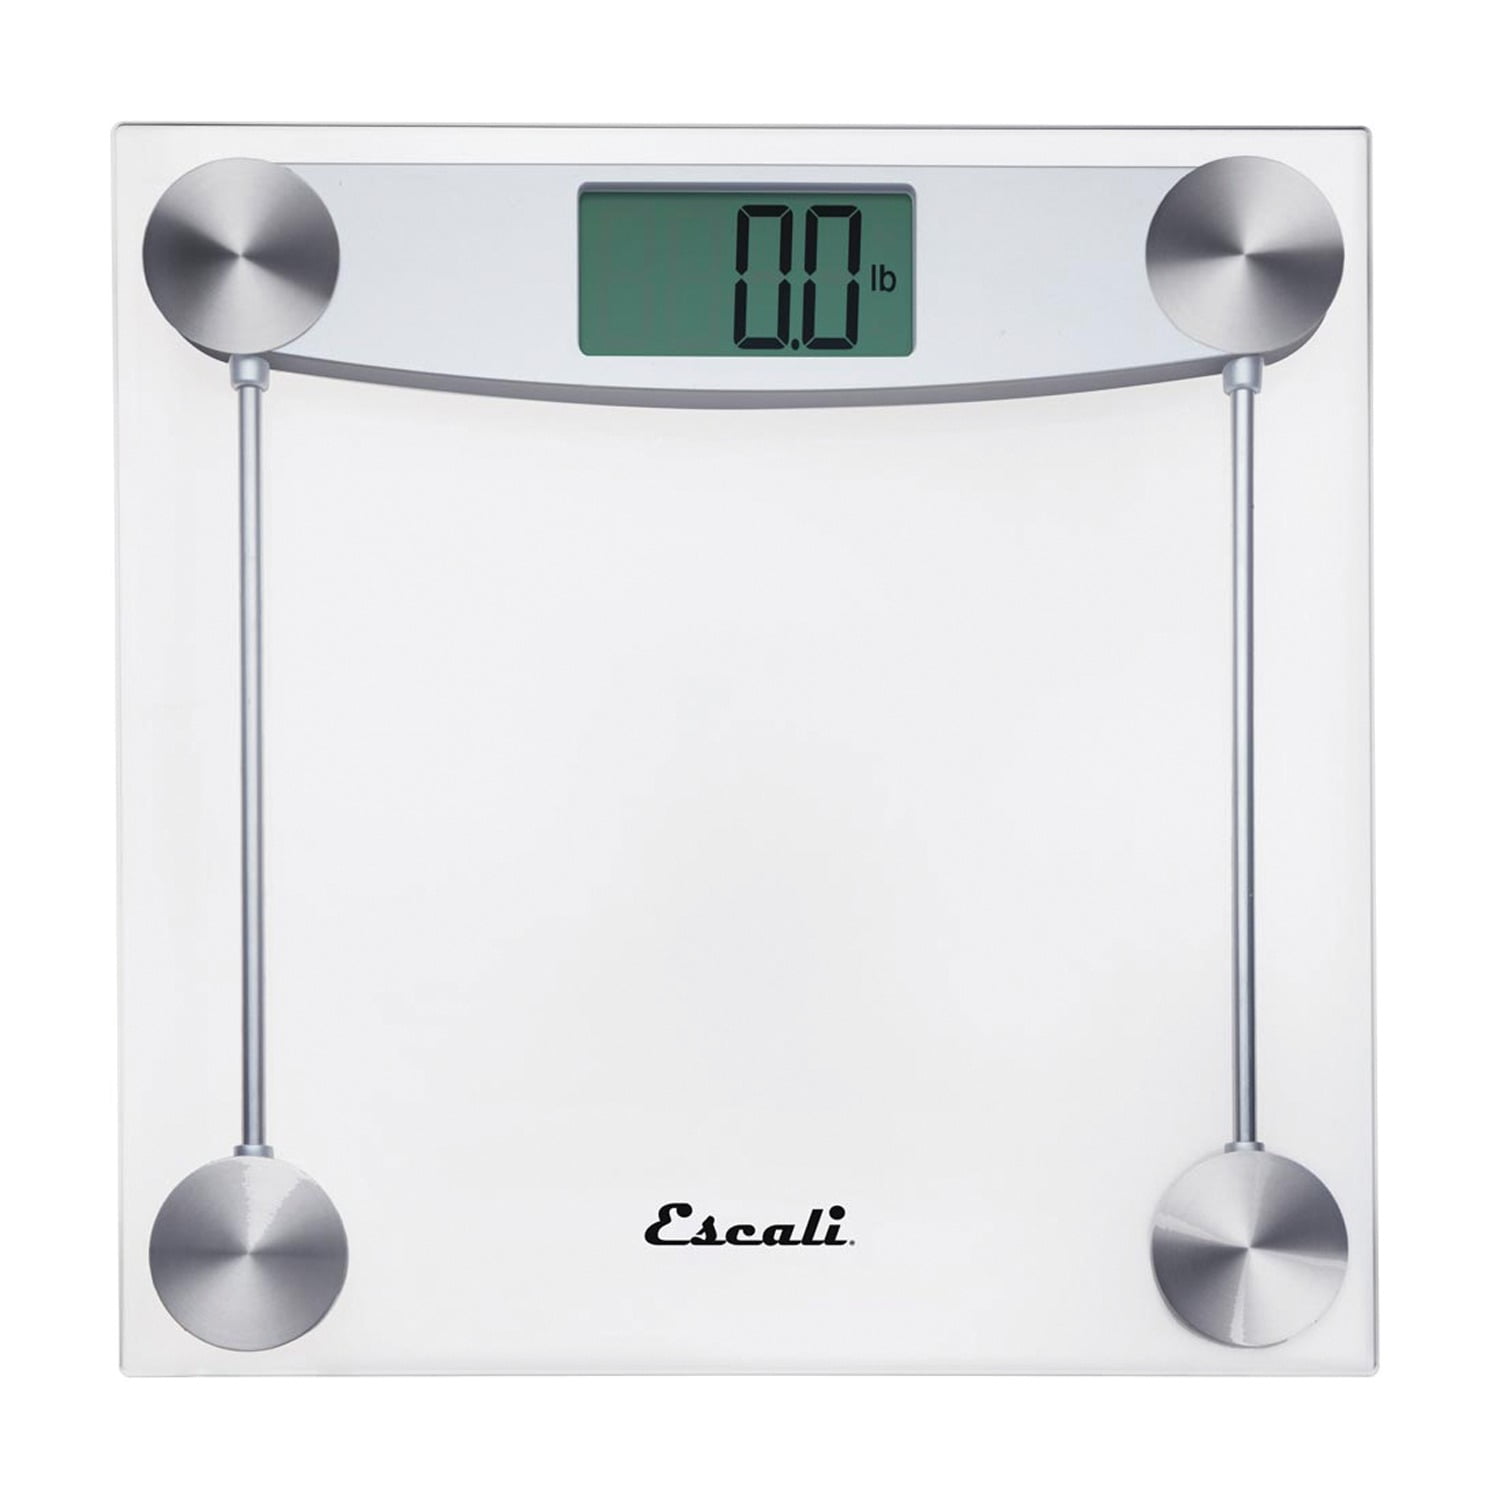 New Bathroom Scale Floor Body Scales Digital Body Weight Scale LCD Display  Glass Smart Electronic Scales - AliExpress